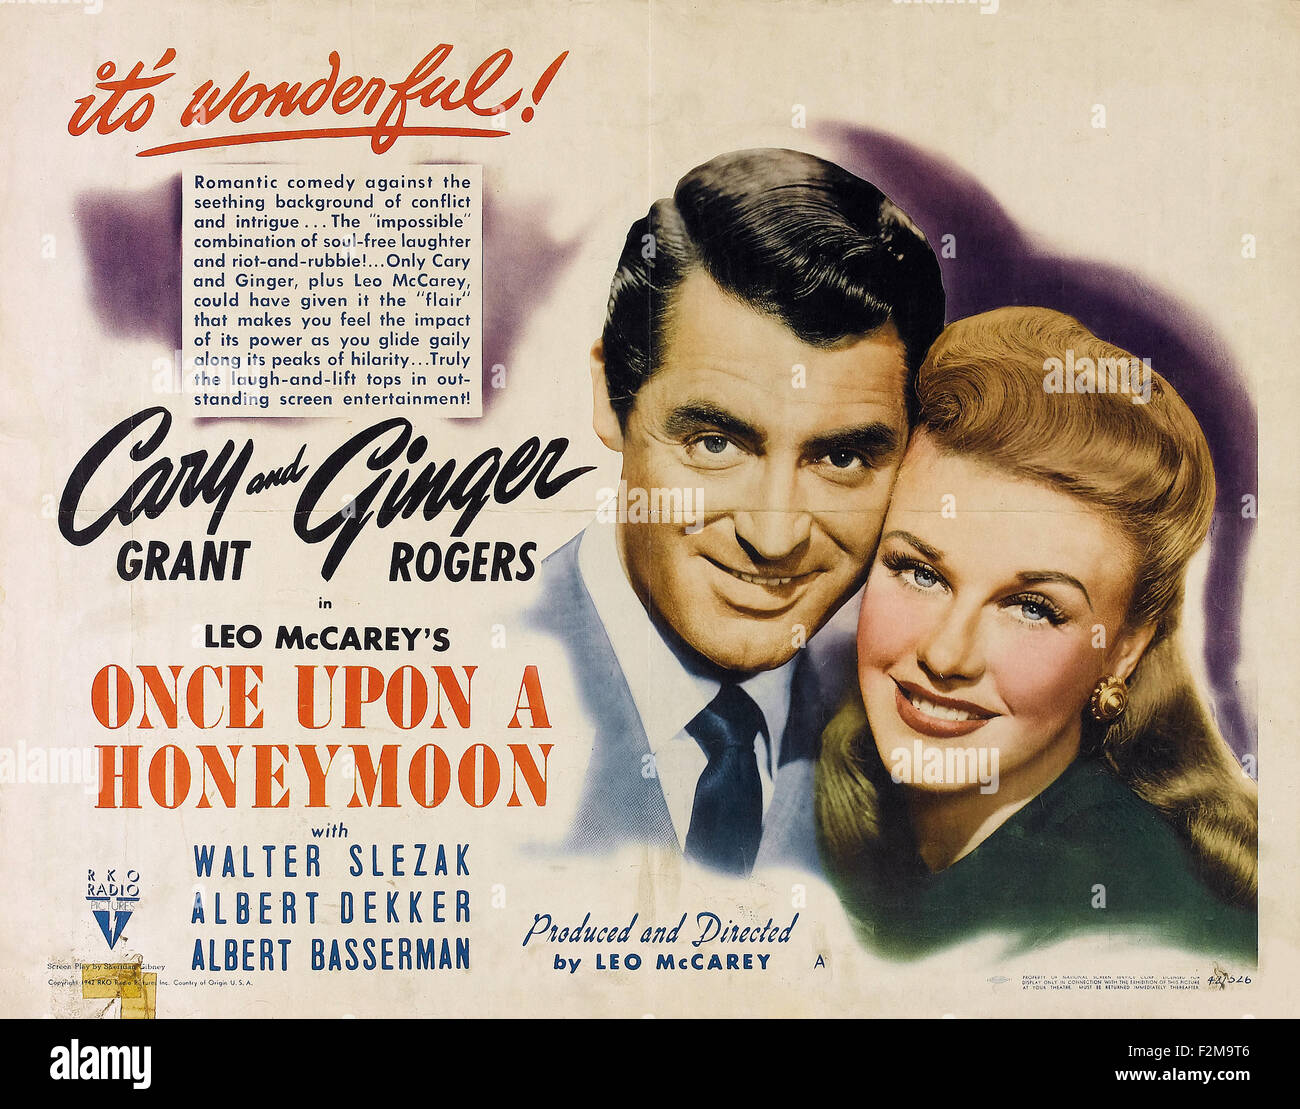 Once Upon a Honeymoon - Movie Poster Stock Photo - Alamy